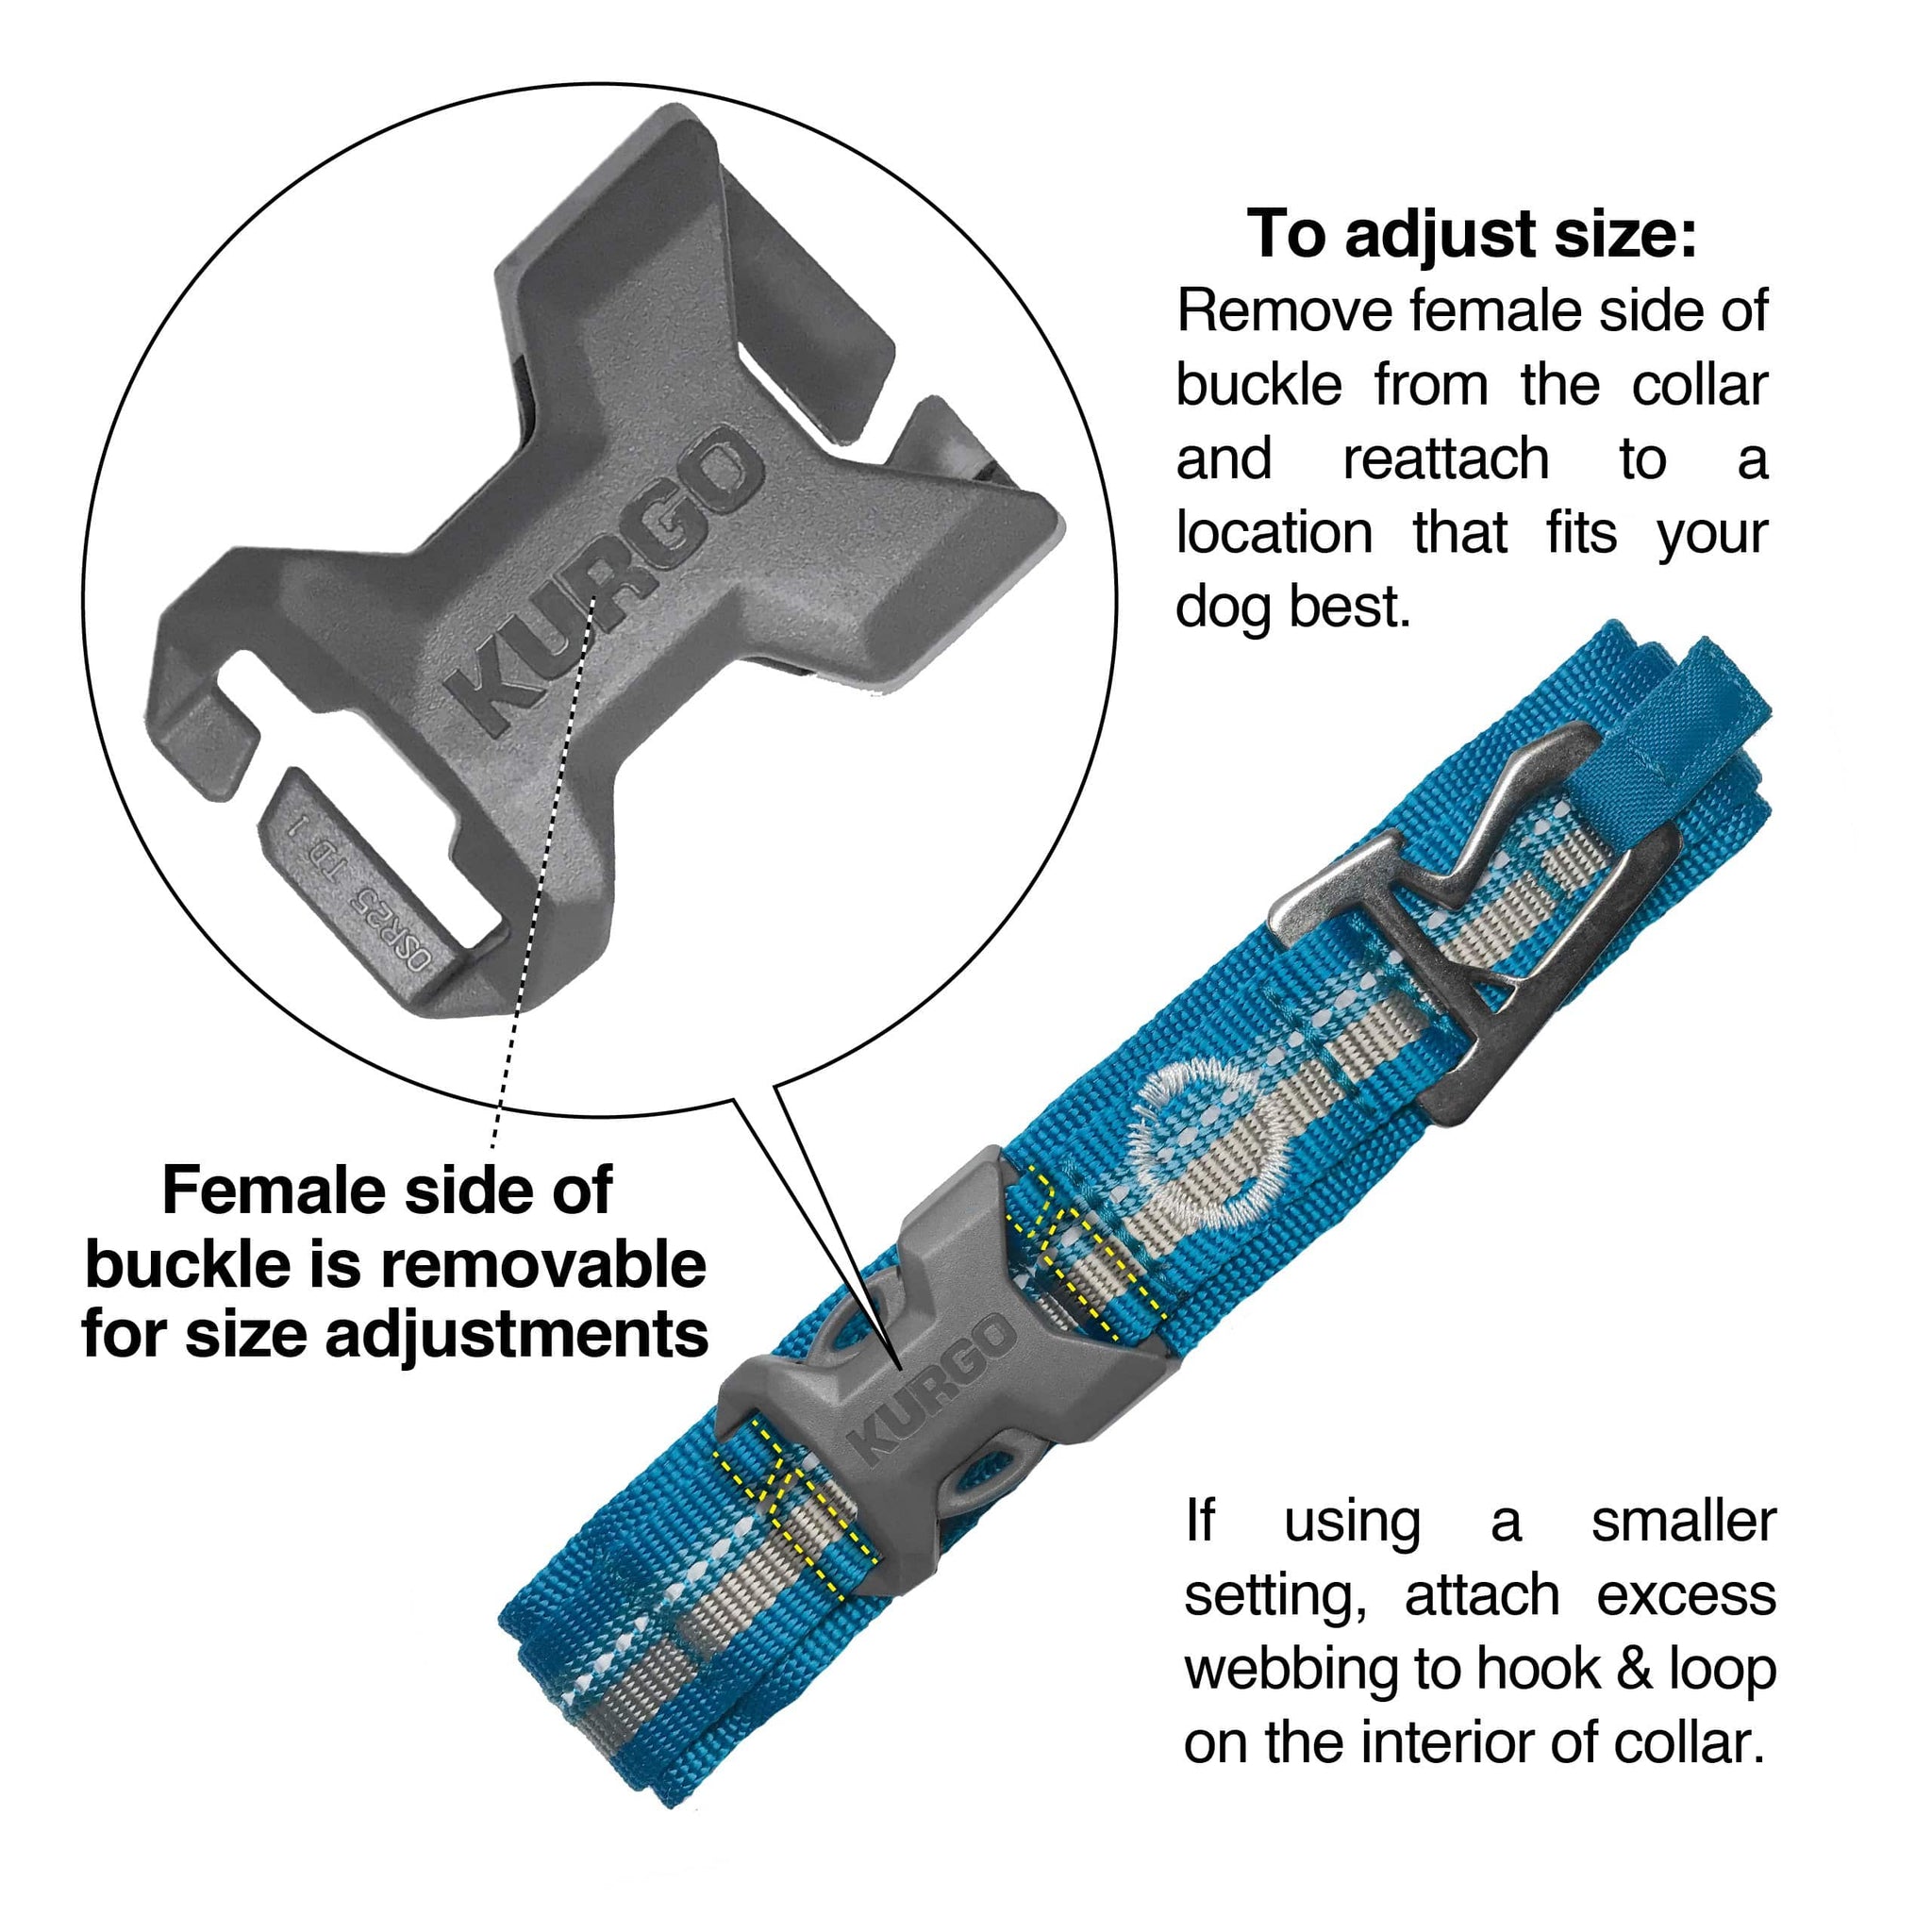 An informative image explaining the adjustment process for the RSG Collar